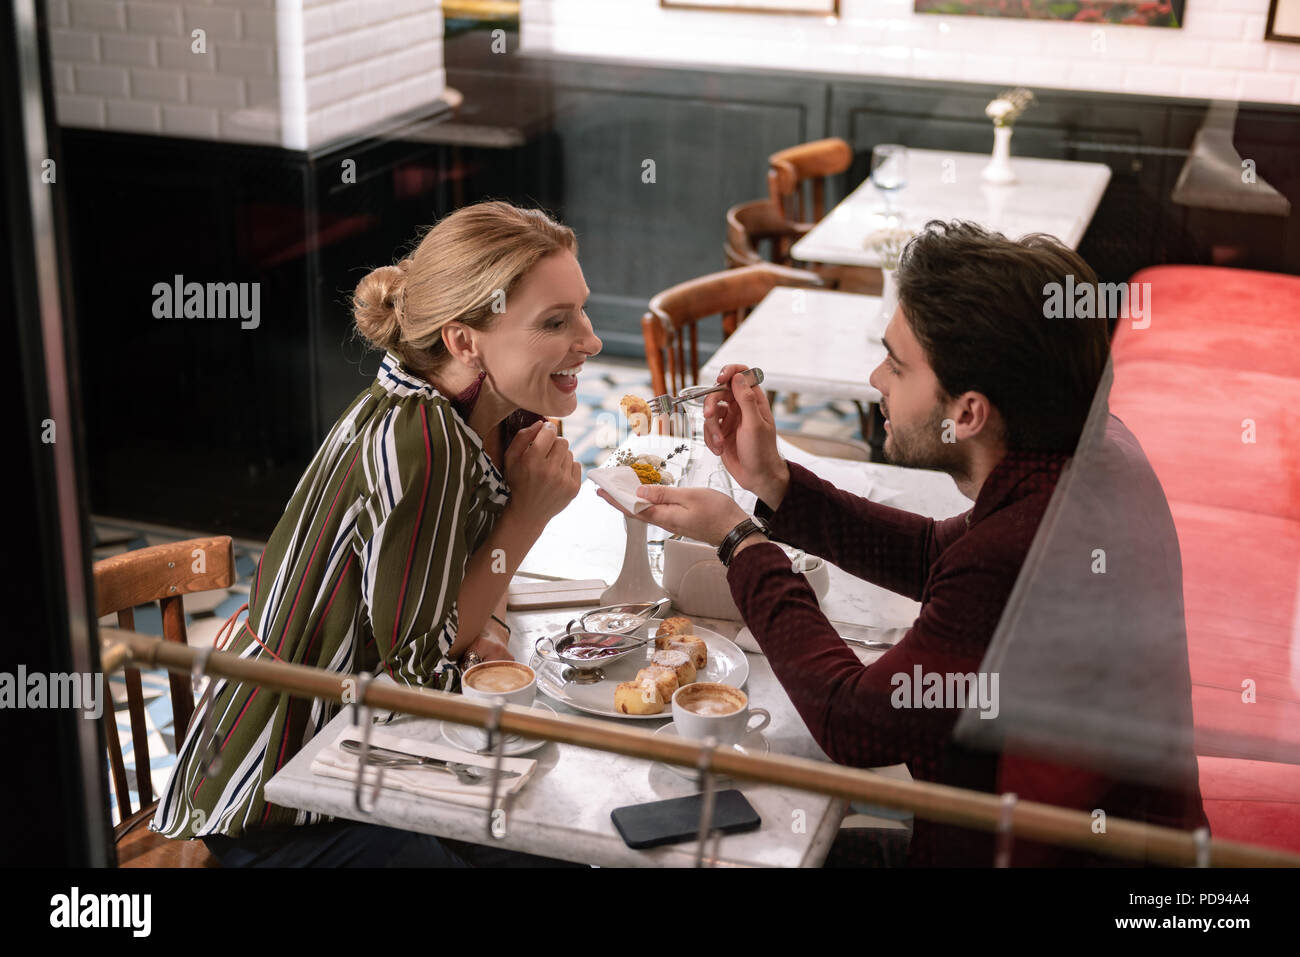 Appealing handsome man indulging woman Stock Photo